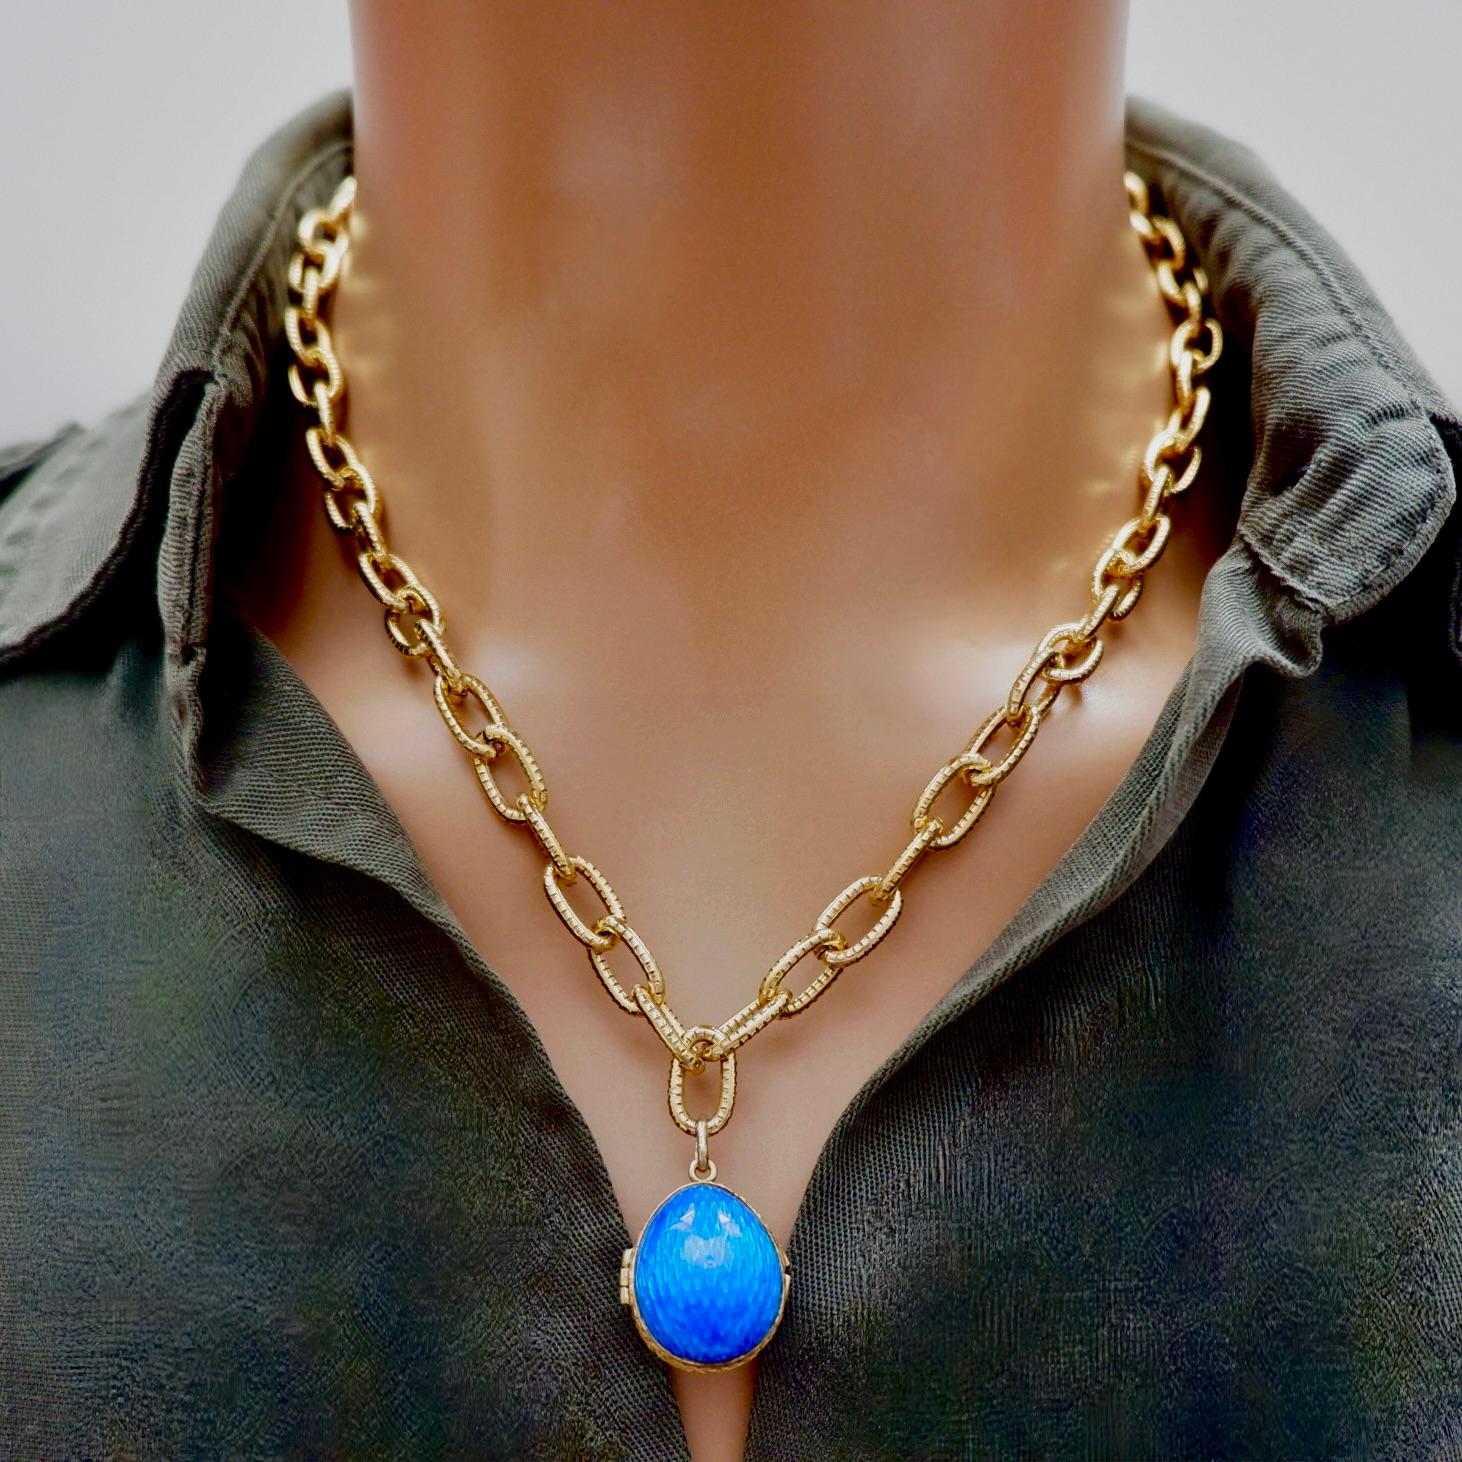 Vintage Brass Chain, Blue Enamel Vintage Egg Locket Pendant Necklace In New Condition For Sale In Pacific Palisades, CA